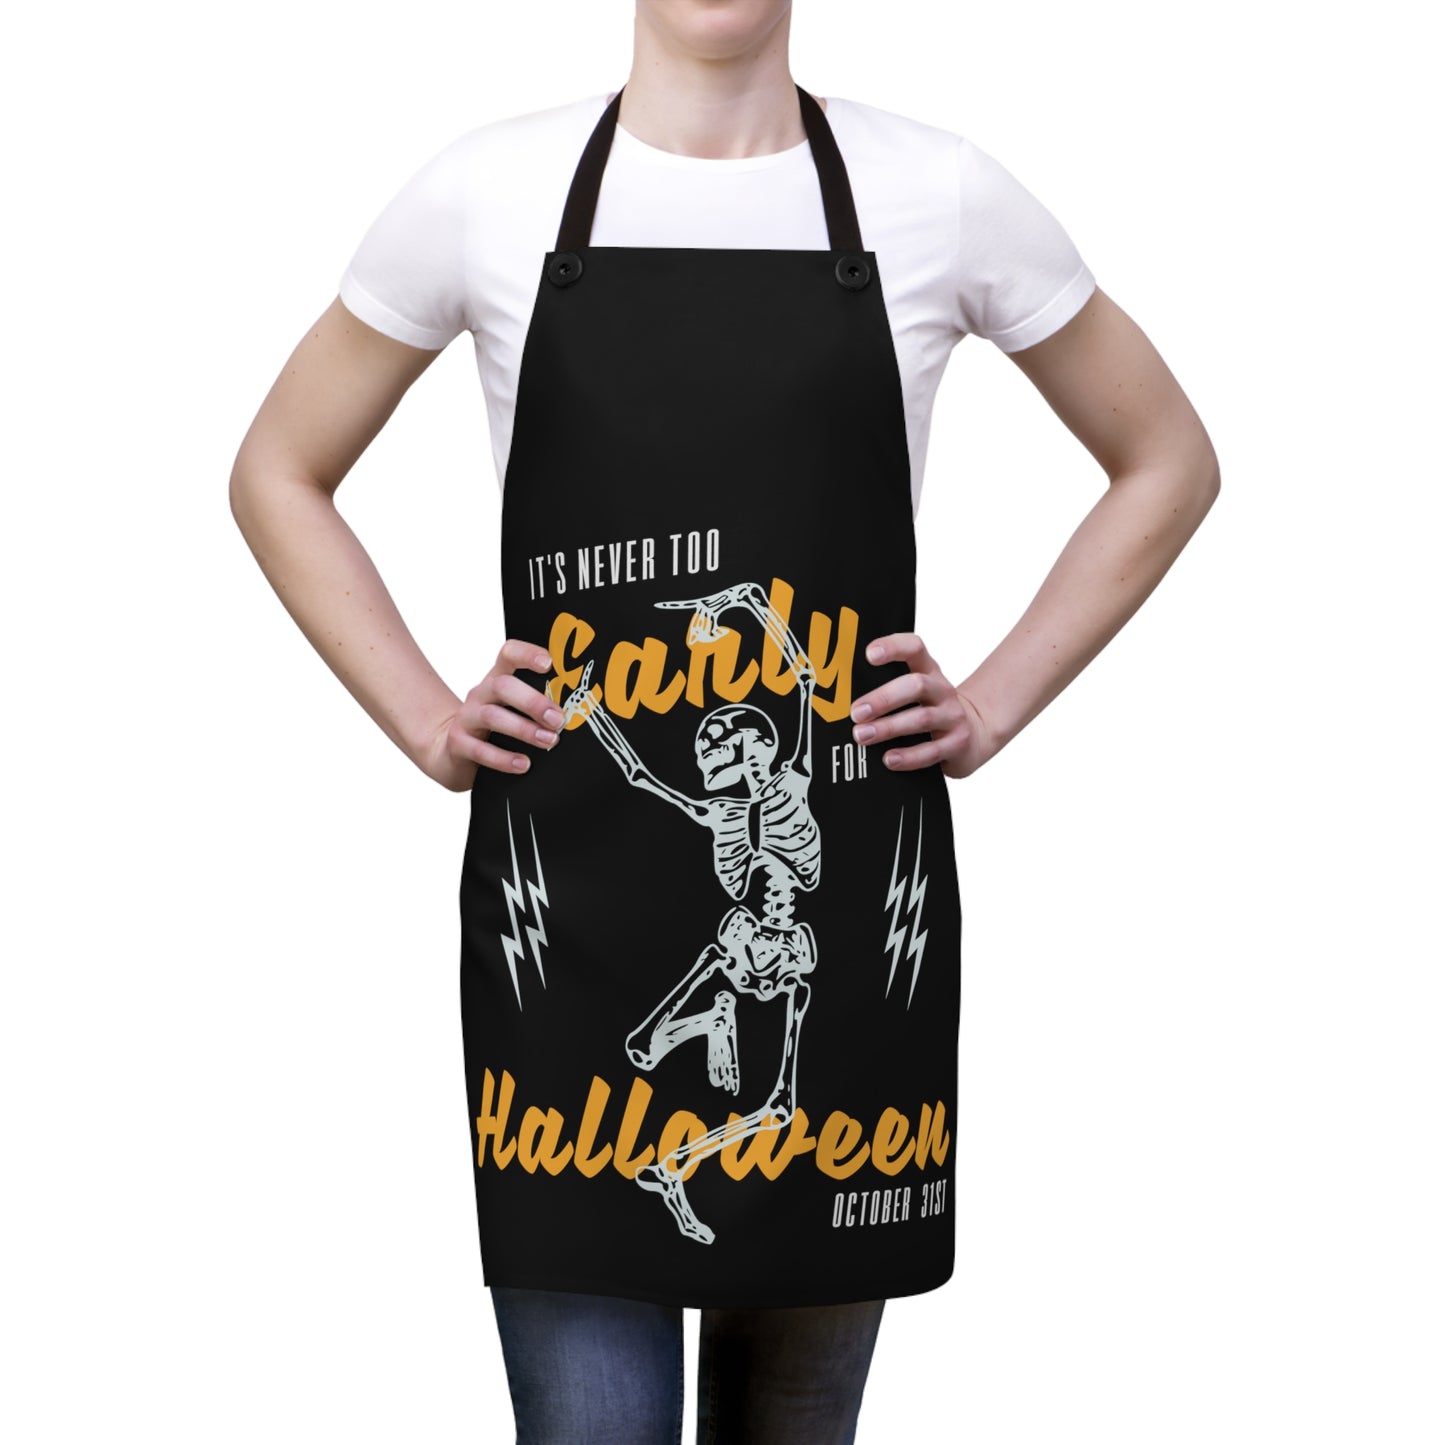 It's Never To Early for Halloween Baking Apron (AOP)